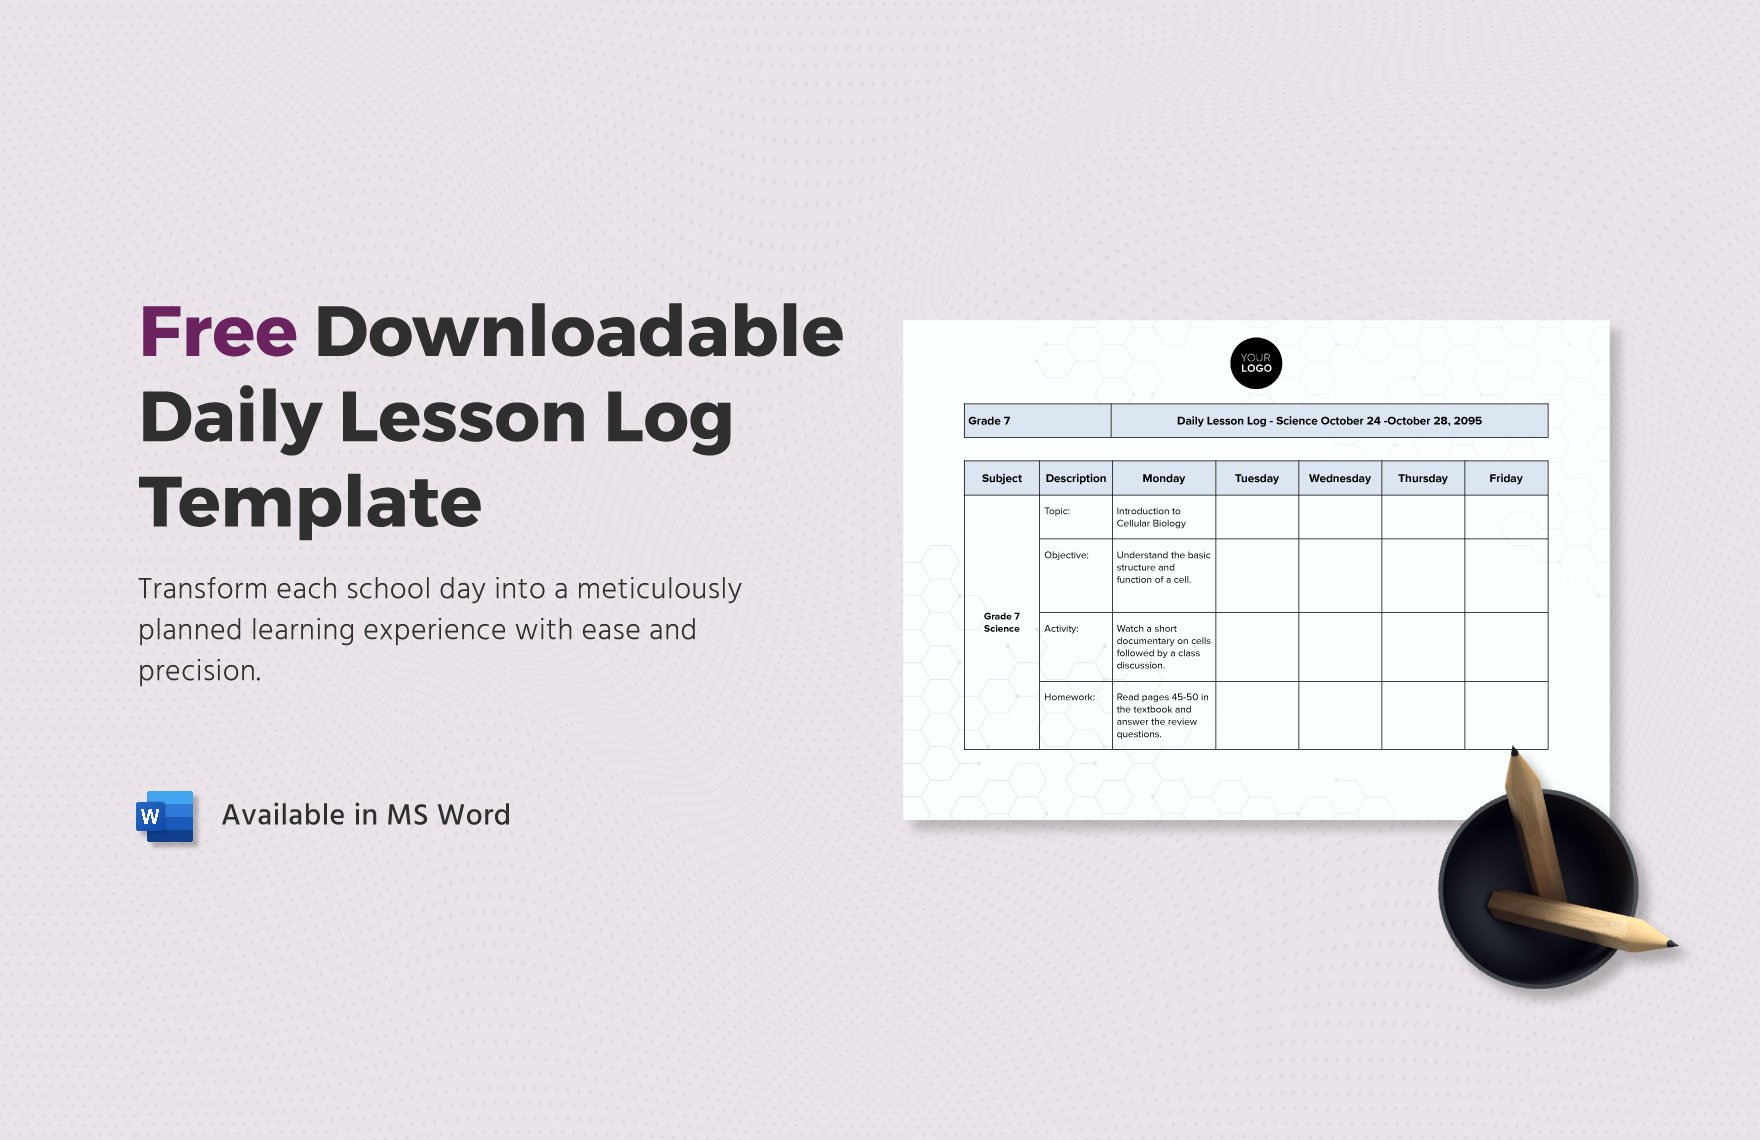 Downloadable Daily Lesson Log Template